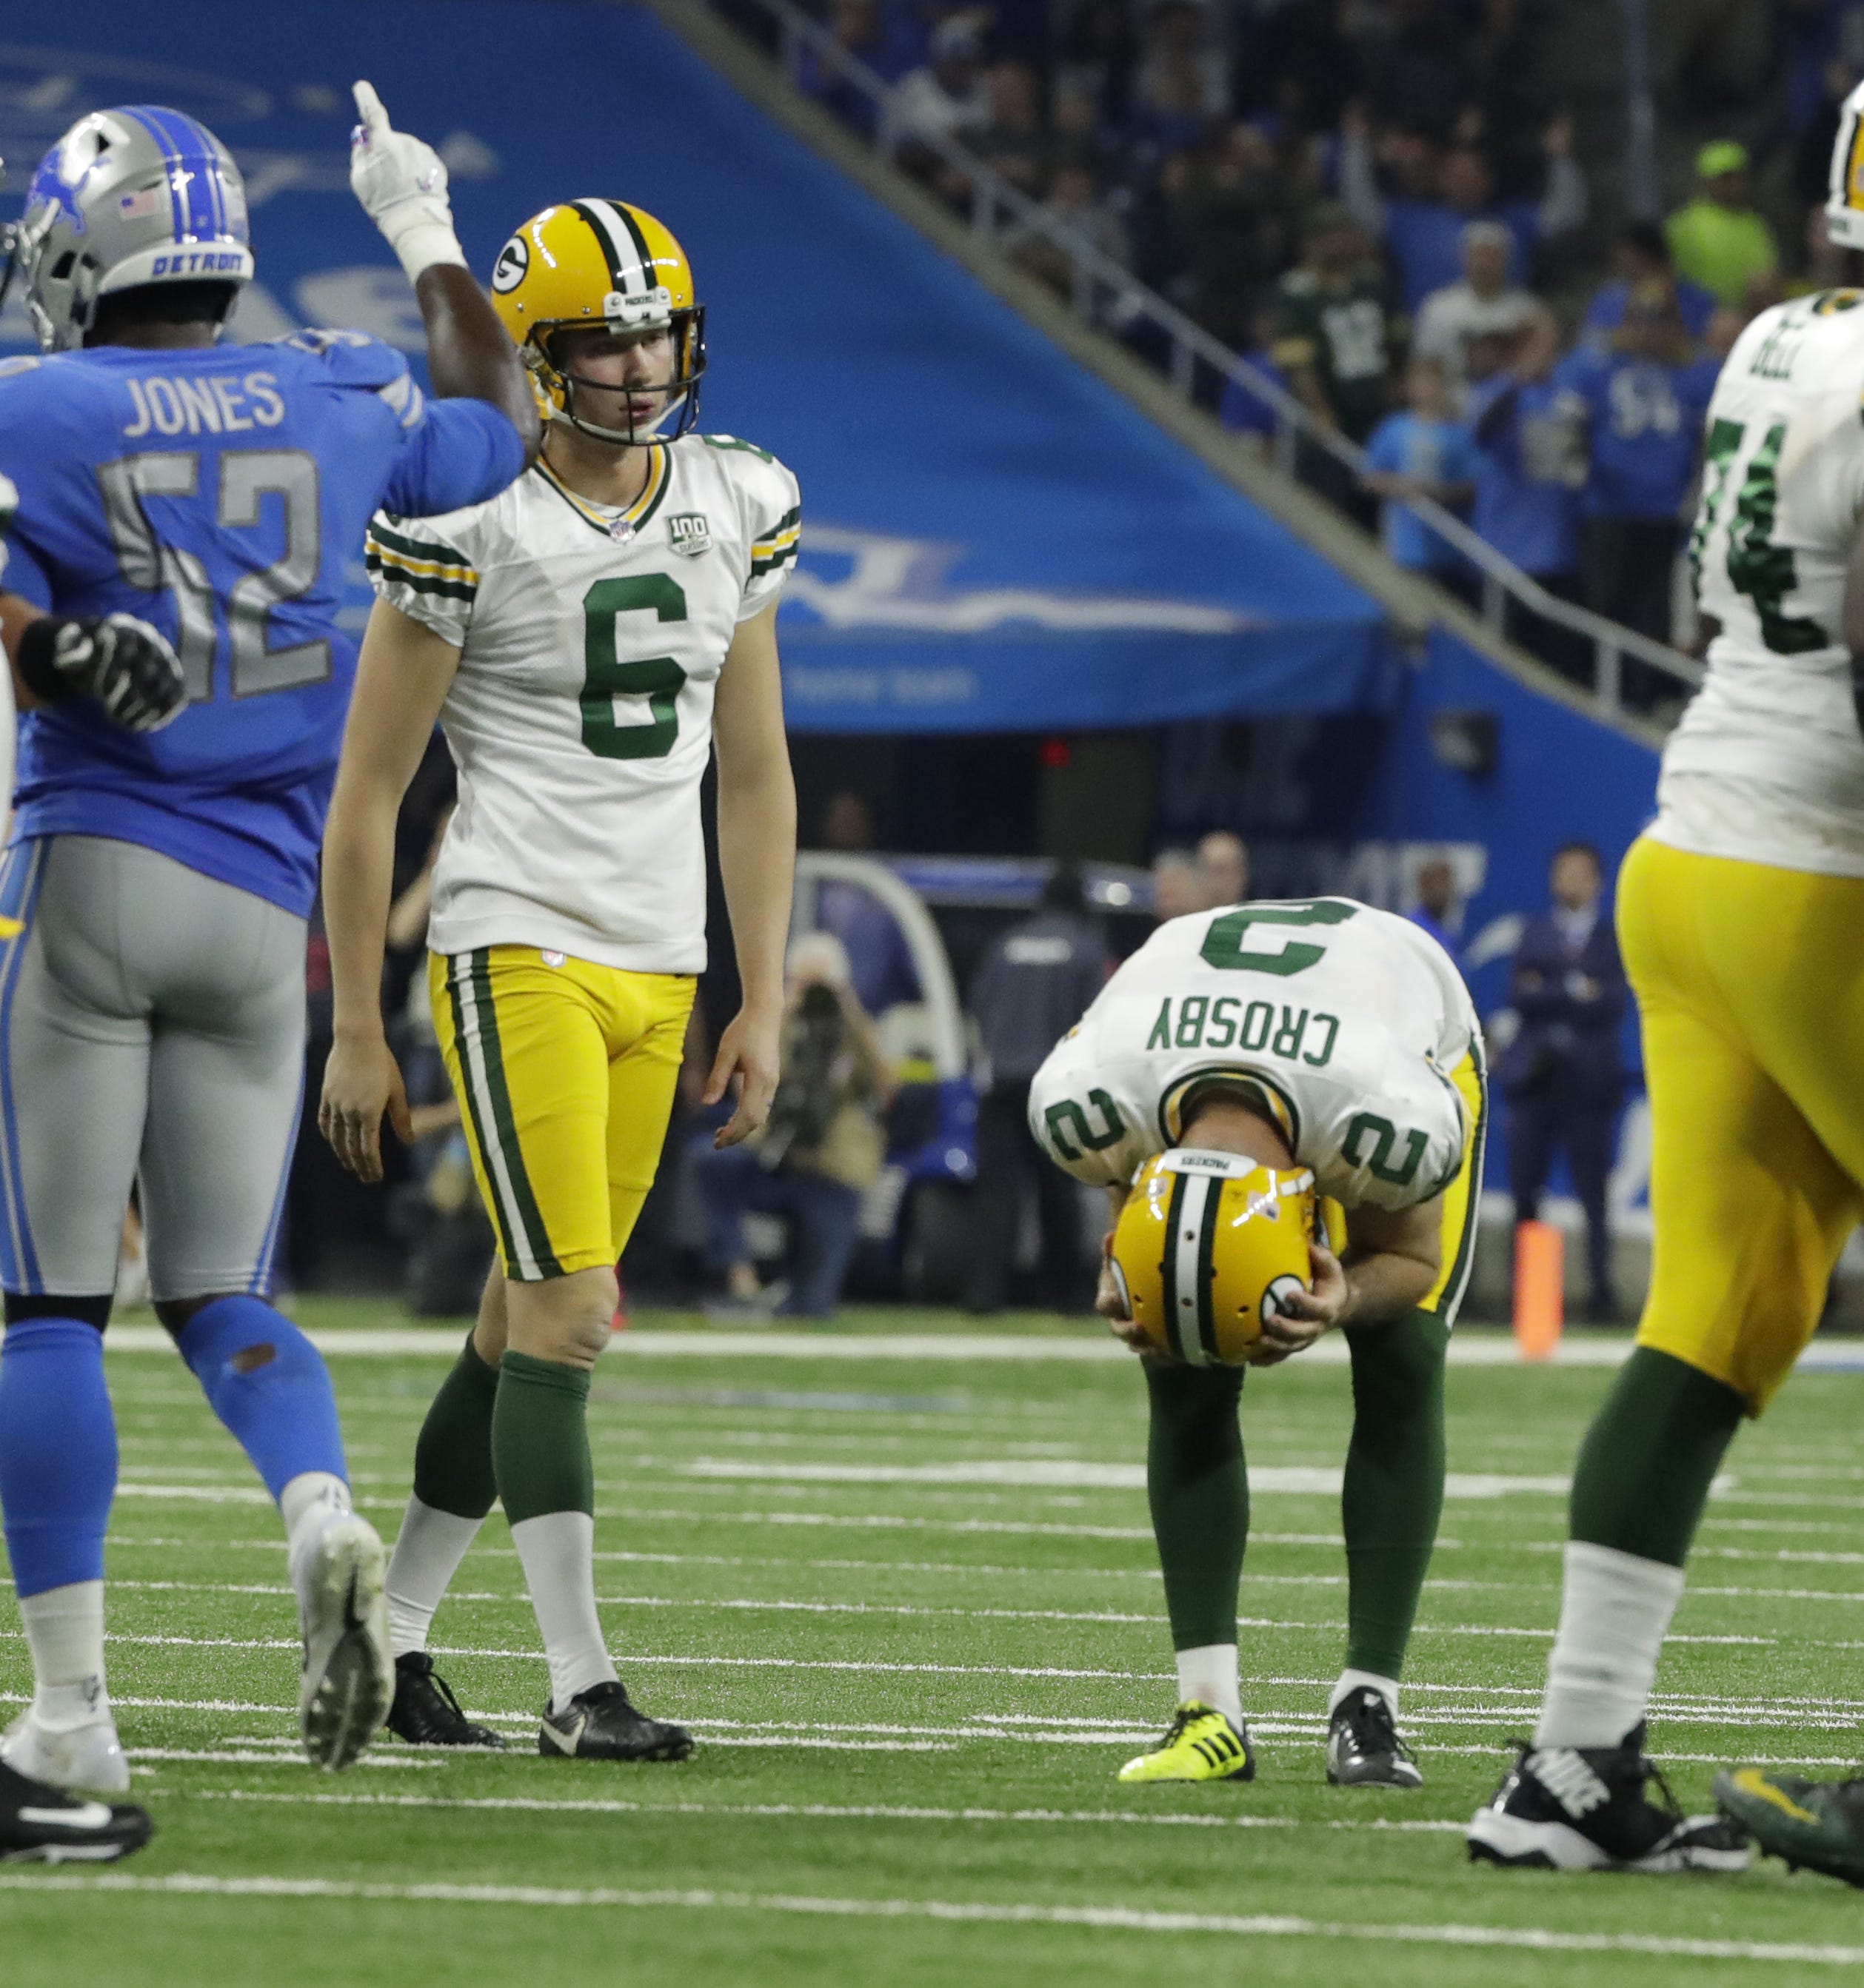 Green Bay Packers kicker Mason Crosby (2) reacts after missing his third field goal attempt during the Green Bay Packers vs. Detroit Lions NFL game at Ford Field, Detroit, Sunday, October 7, 2018.